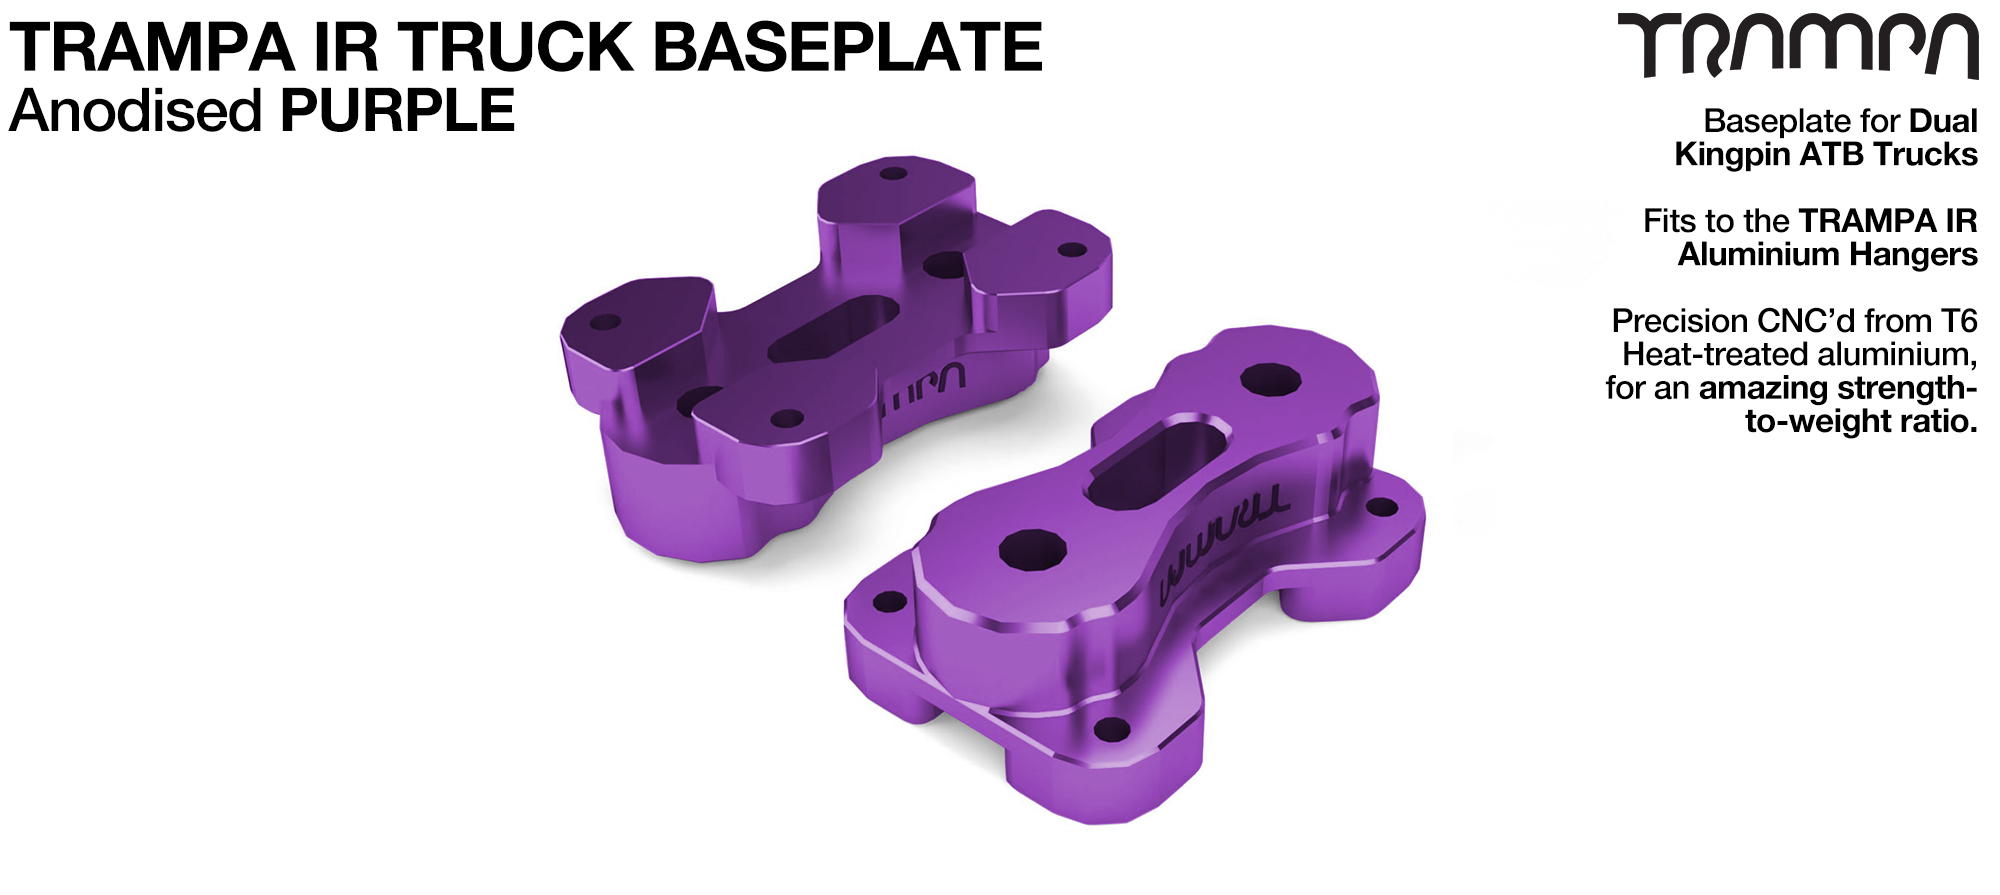 TRAMPA IR BASEPLATE - CNC Precision made TRAMPA IR Trucks are super light & Packed with performance - PURPLE